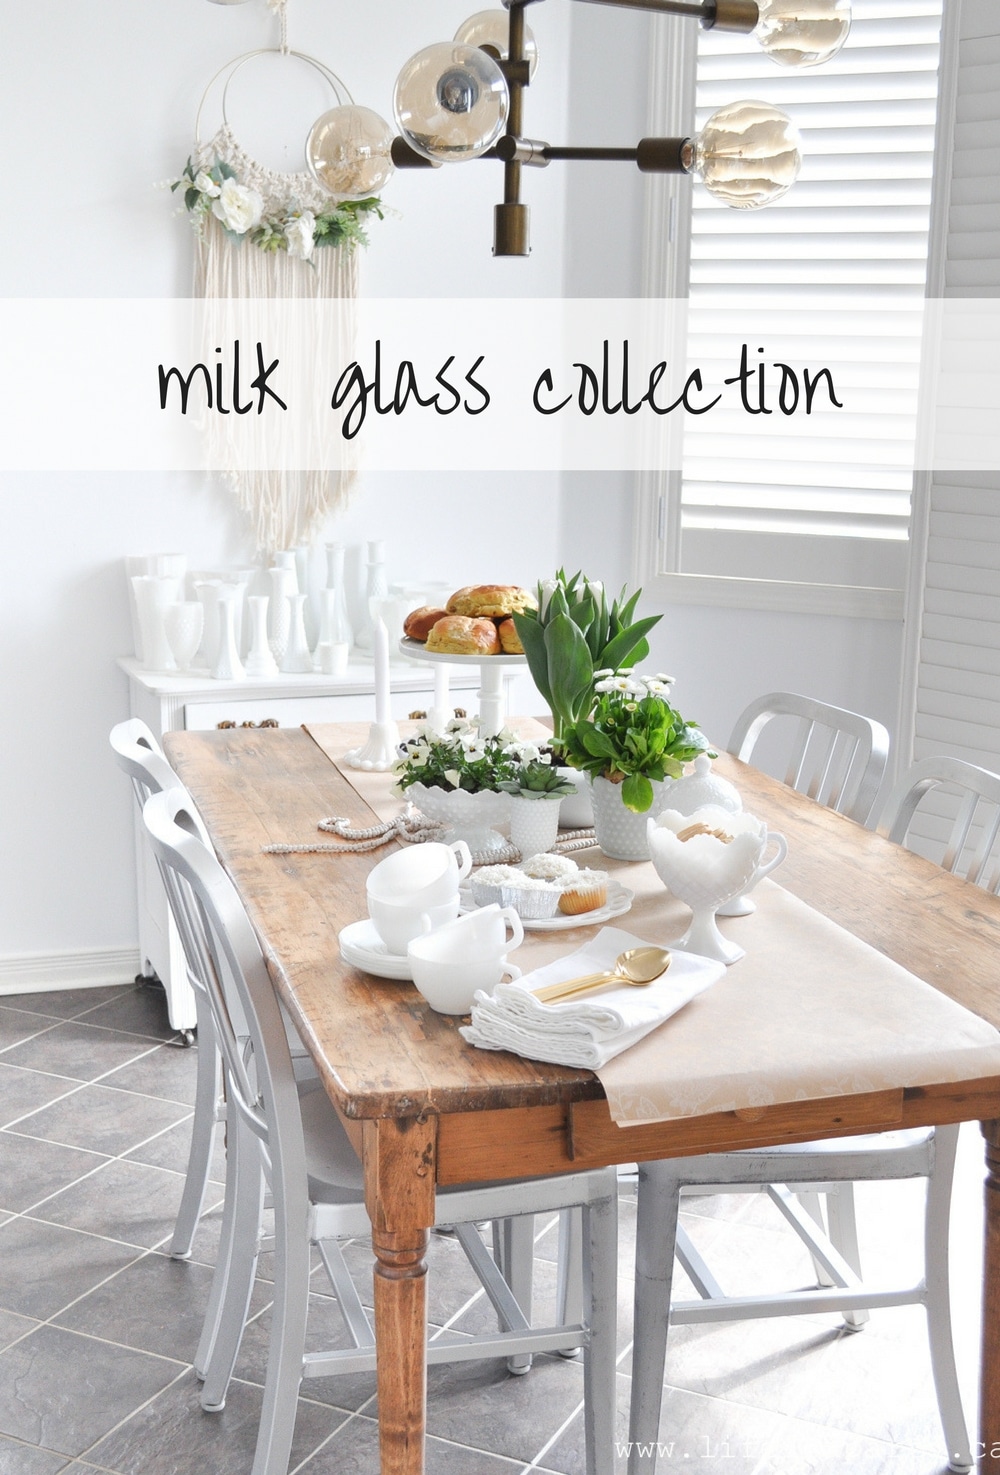 Milk Glass Collection: Vintage milk glass collected from thrift stores, garage sales, and antique shops used for a spring tea party.